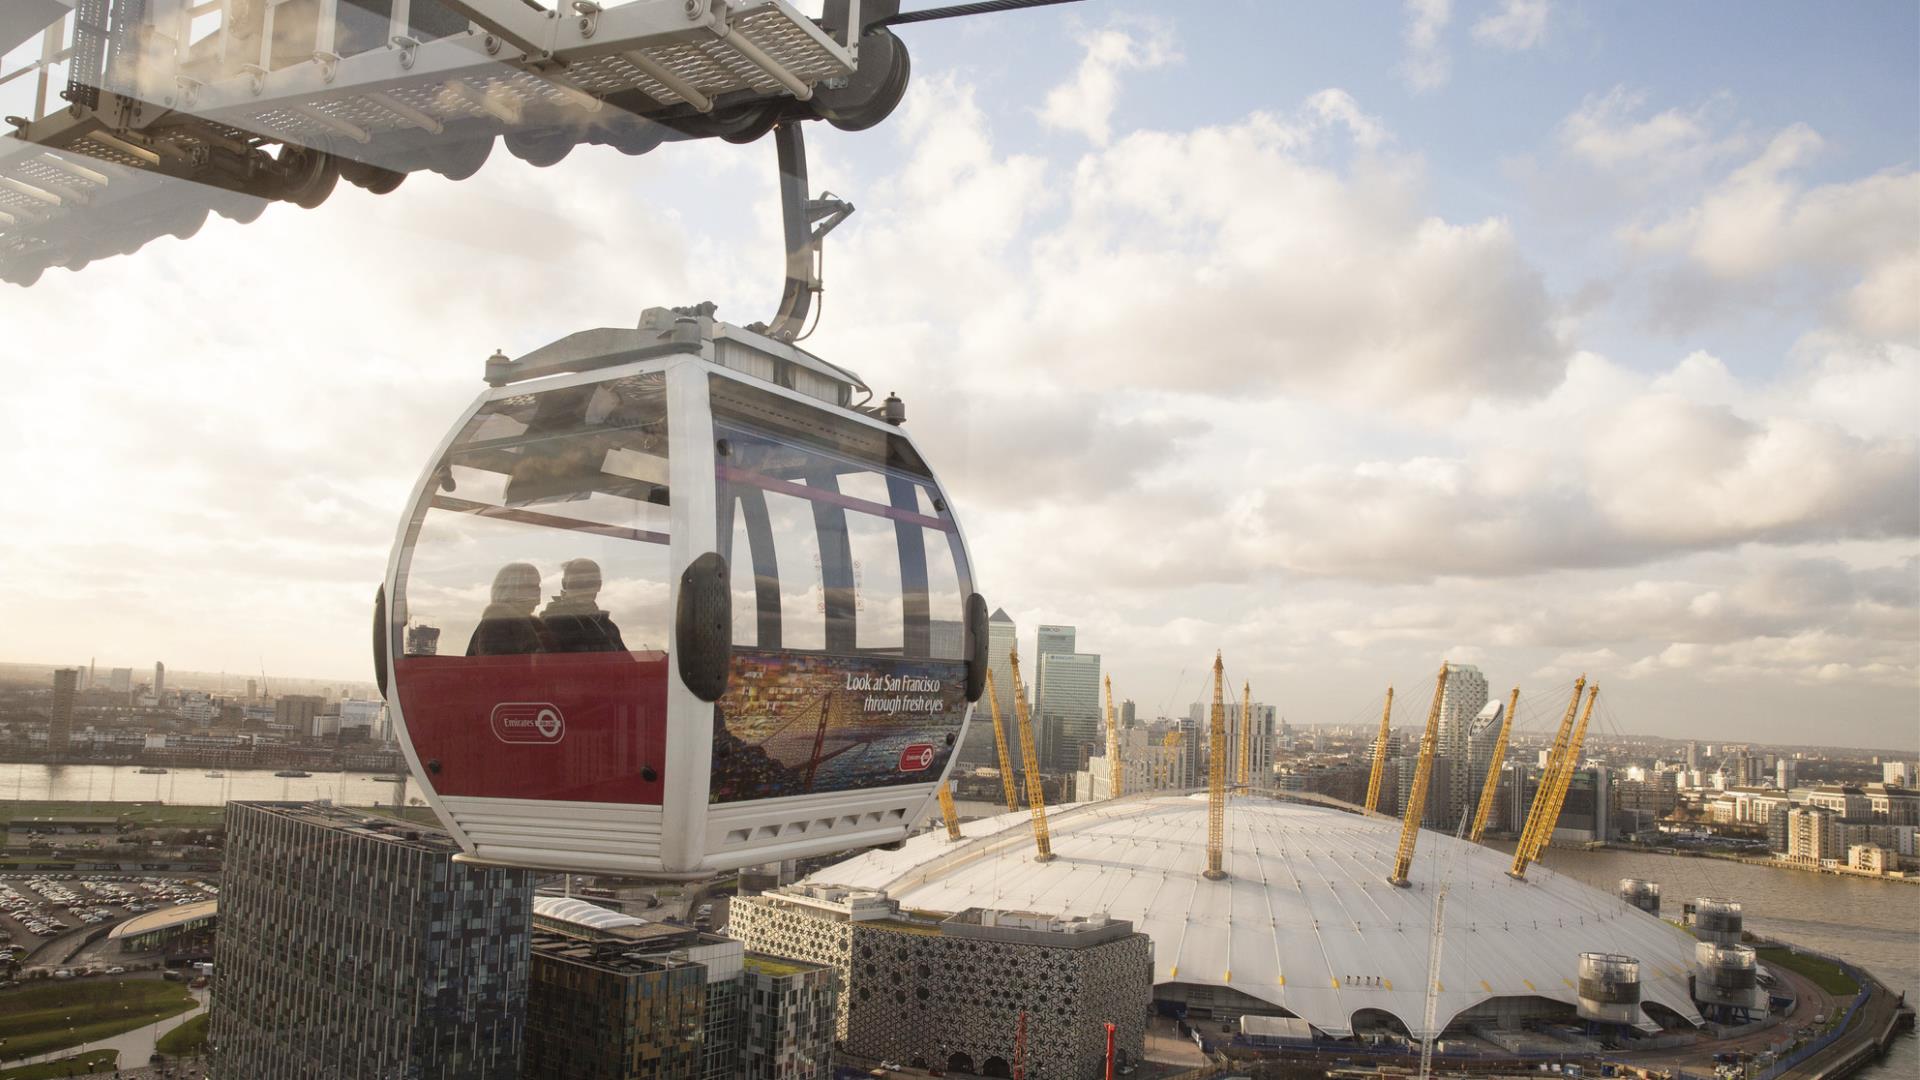 A view of from above of the Emirates Air Line cable car and The O2 on Greenwich Peninsula.